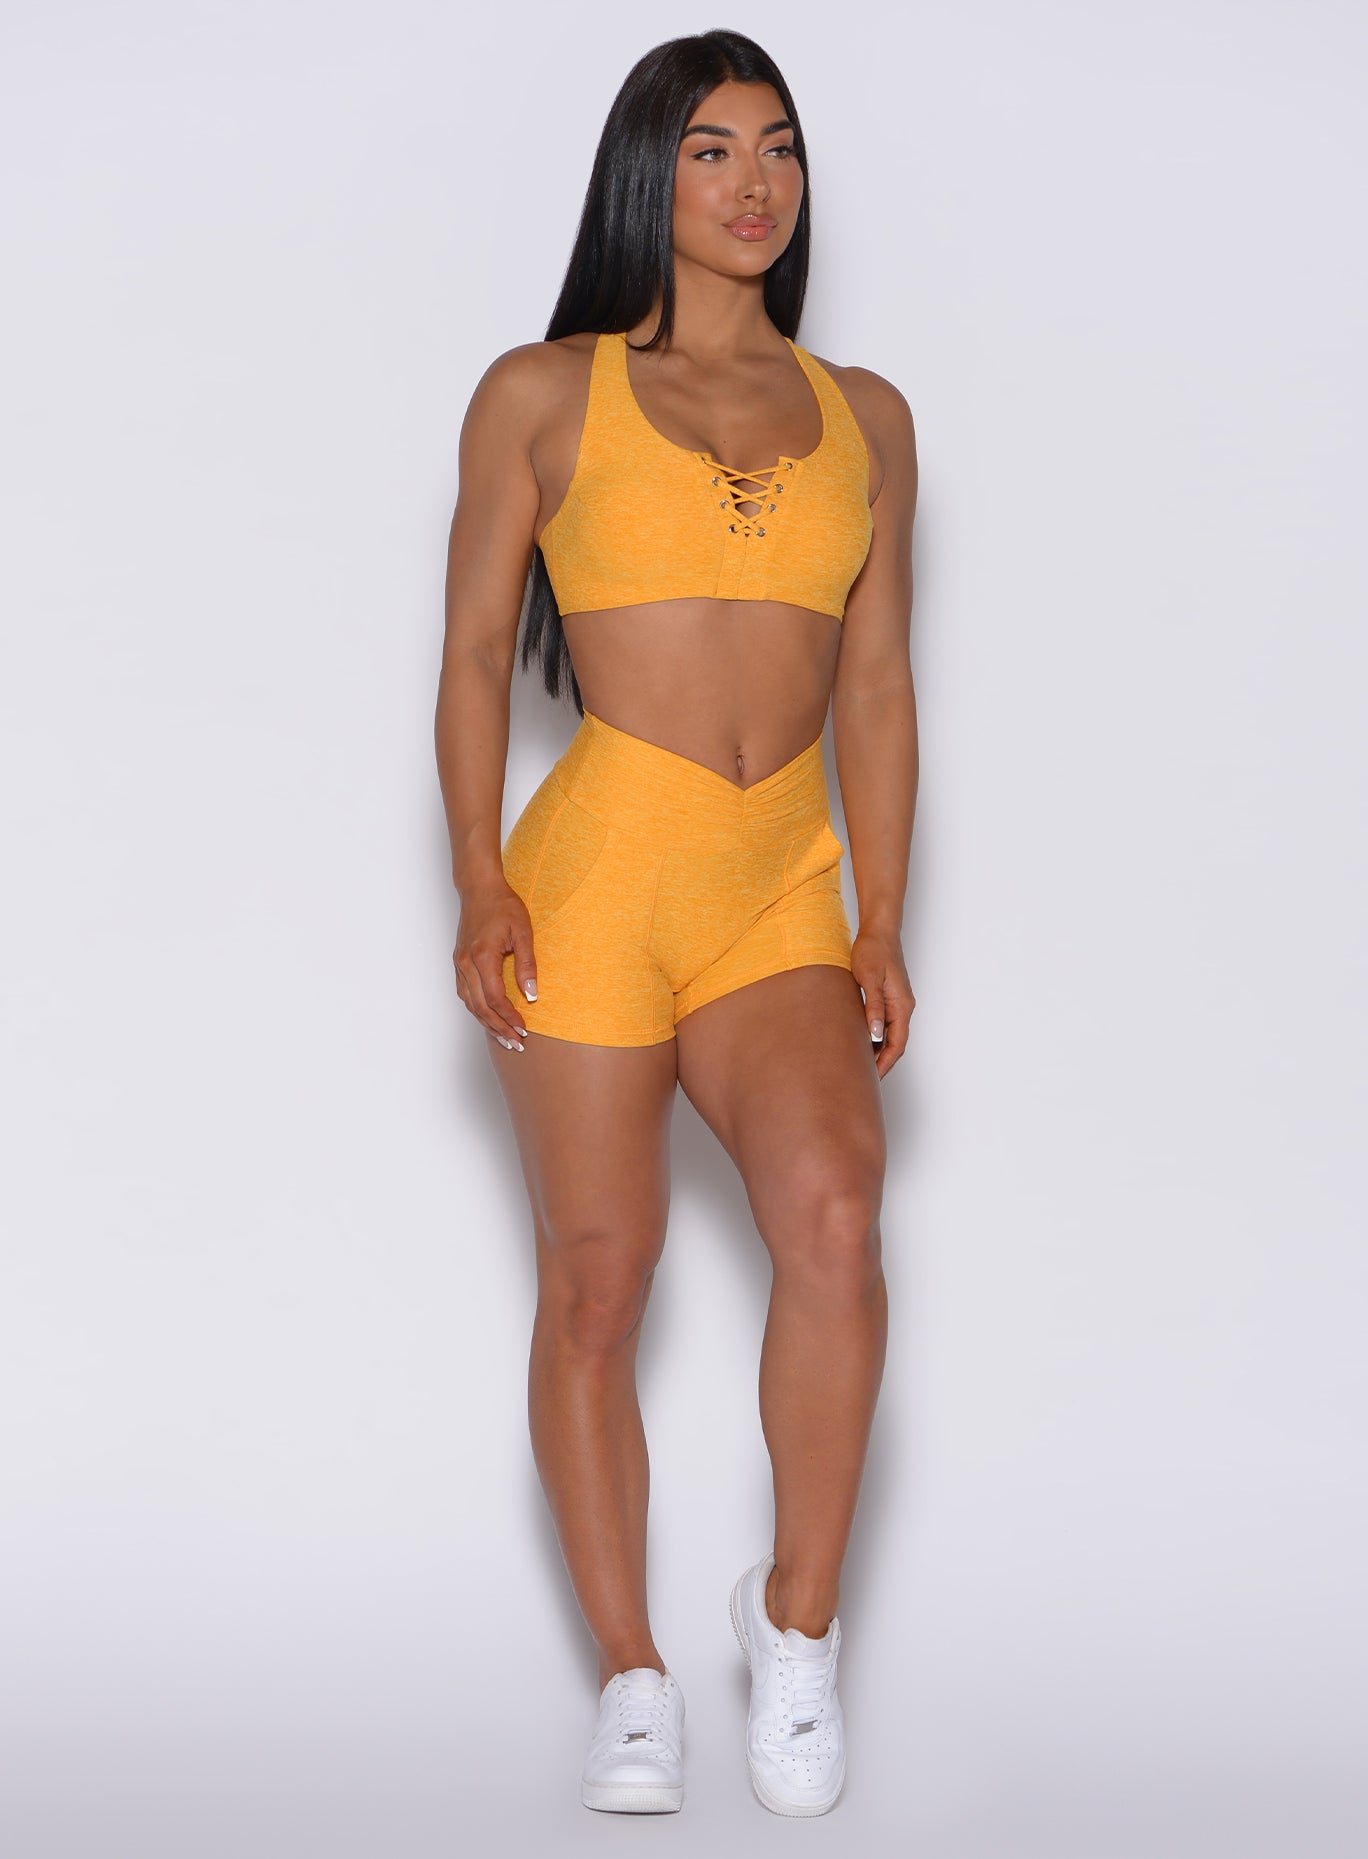 Front profile view of a model facing forward wearing our V scrunch shorts in sunkissed color and a matching bra